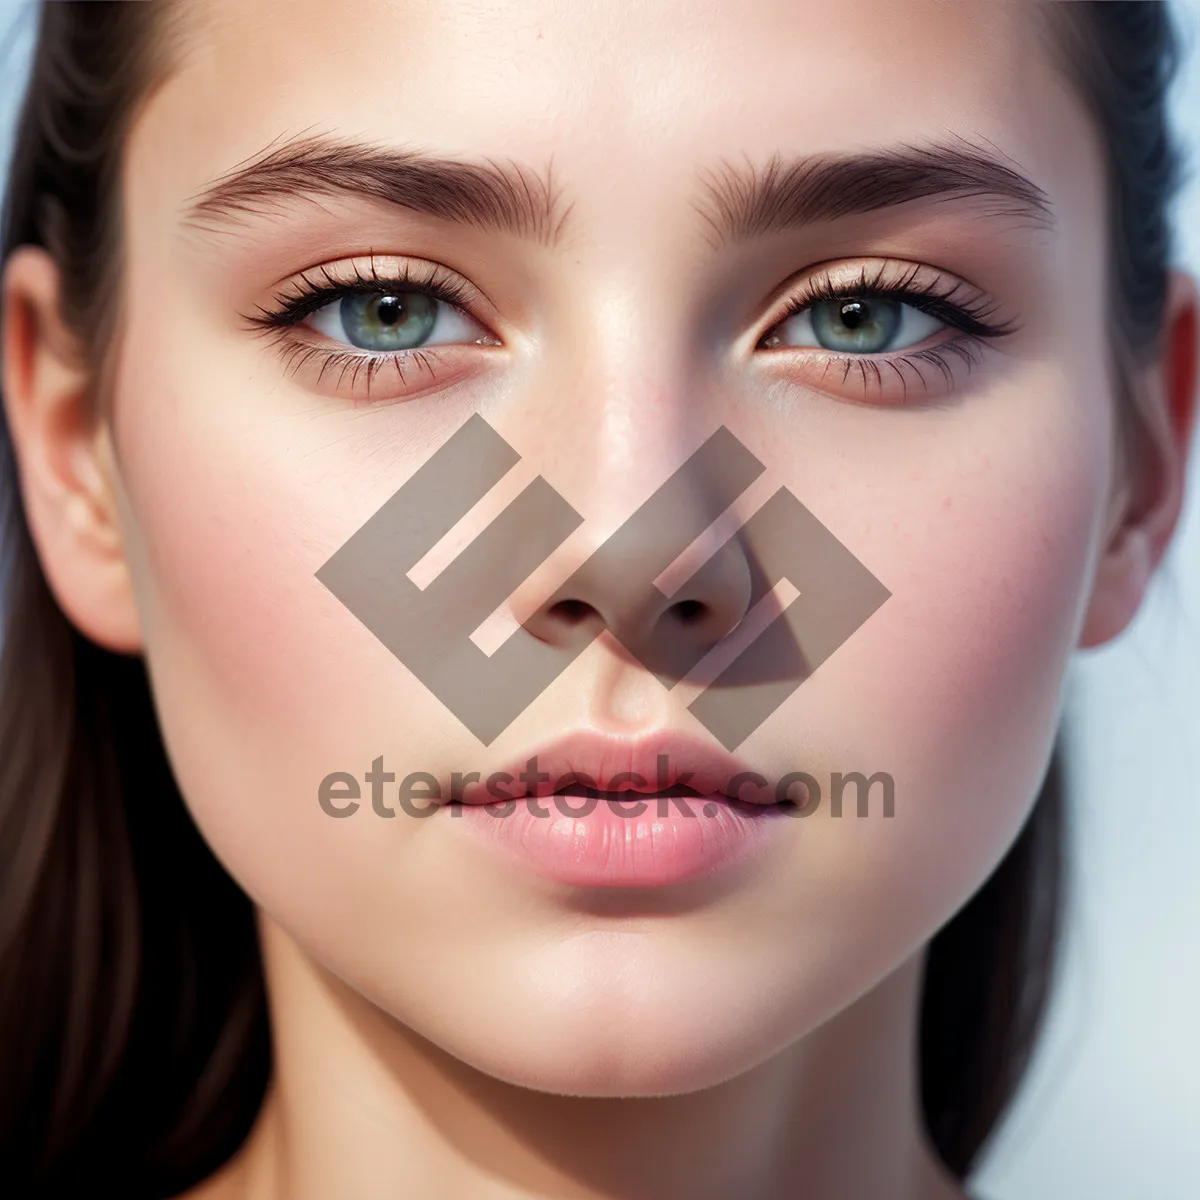 Picture of Flawless Beauty: Closeup Portrait of a Stunning Model